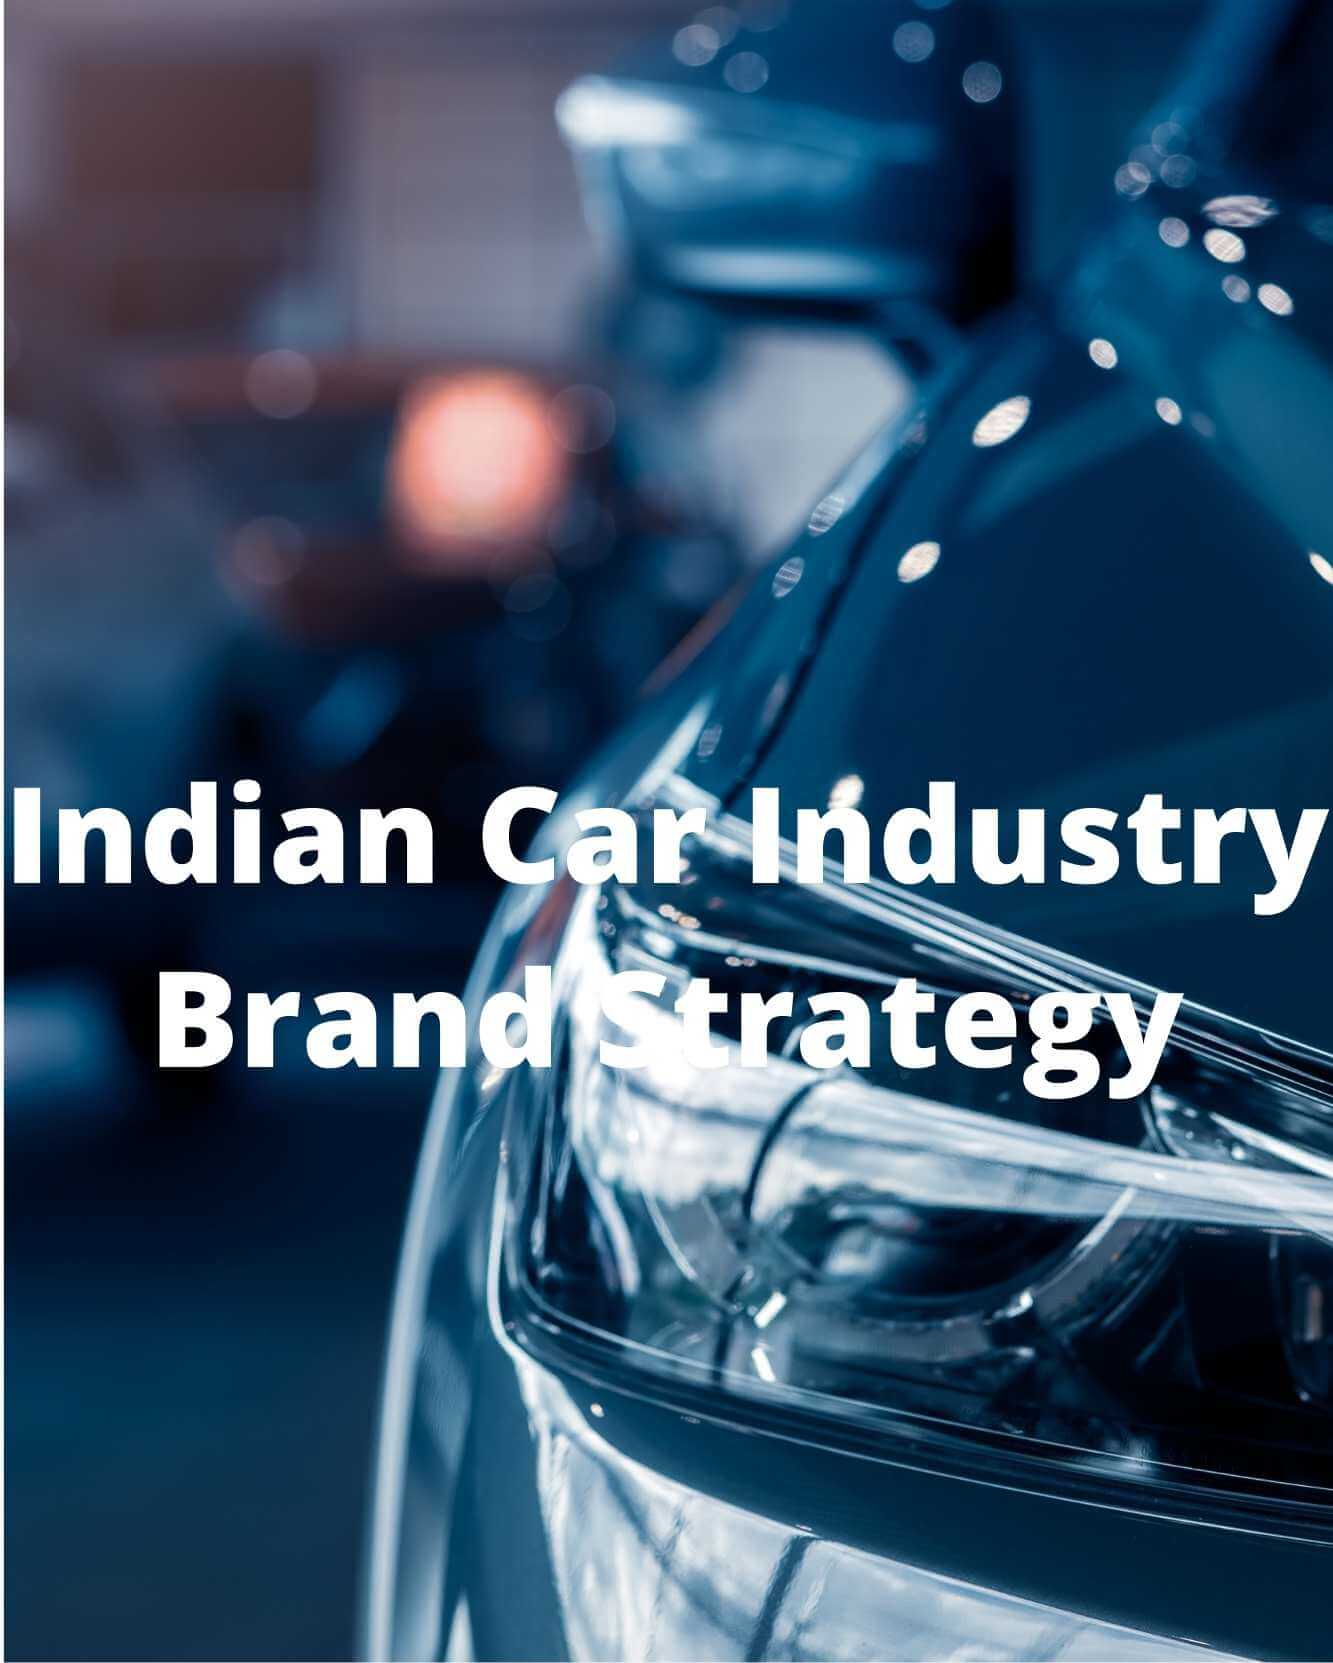 Indian Automobile Brand Strategy Report